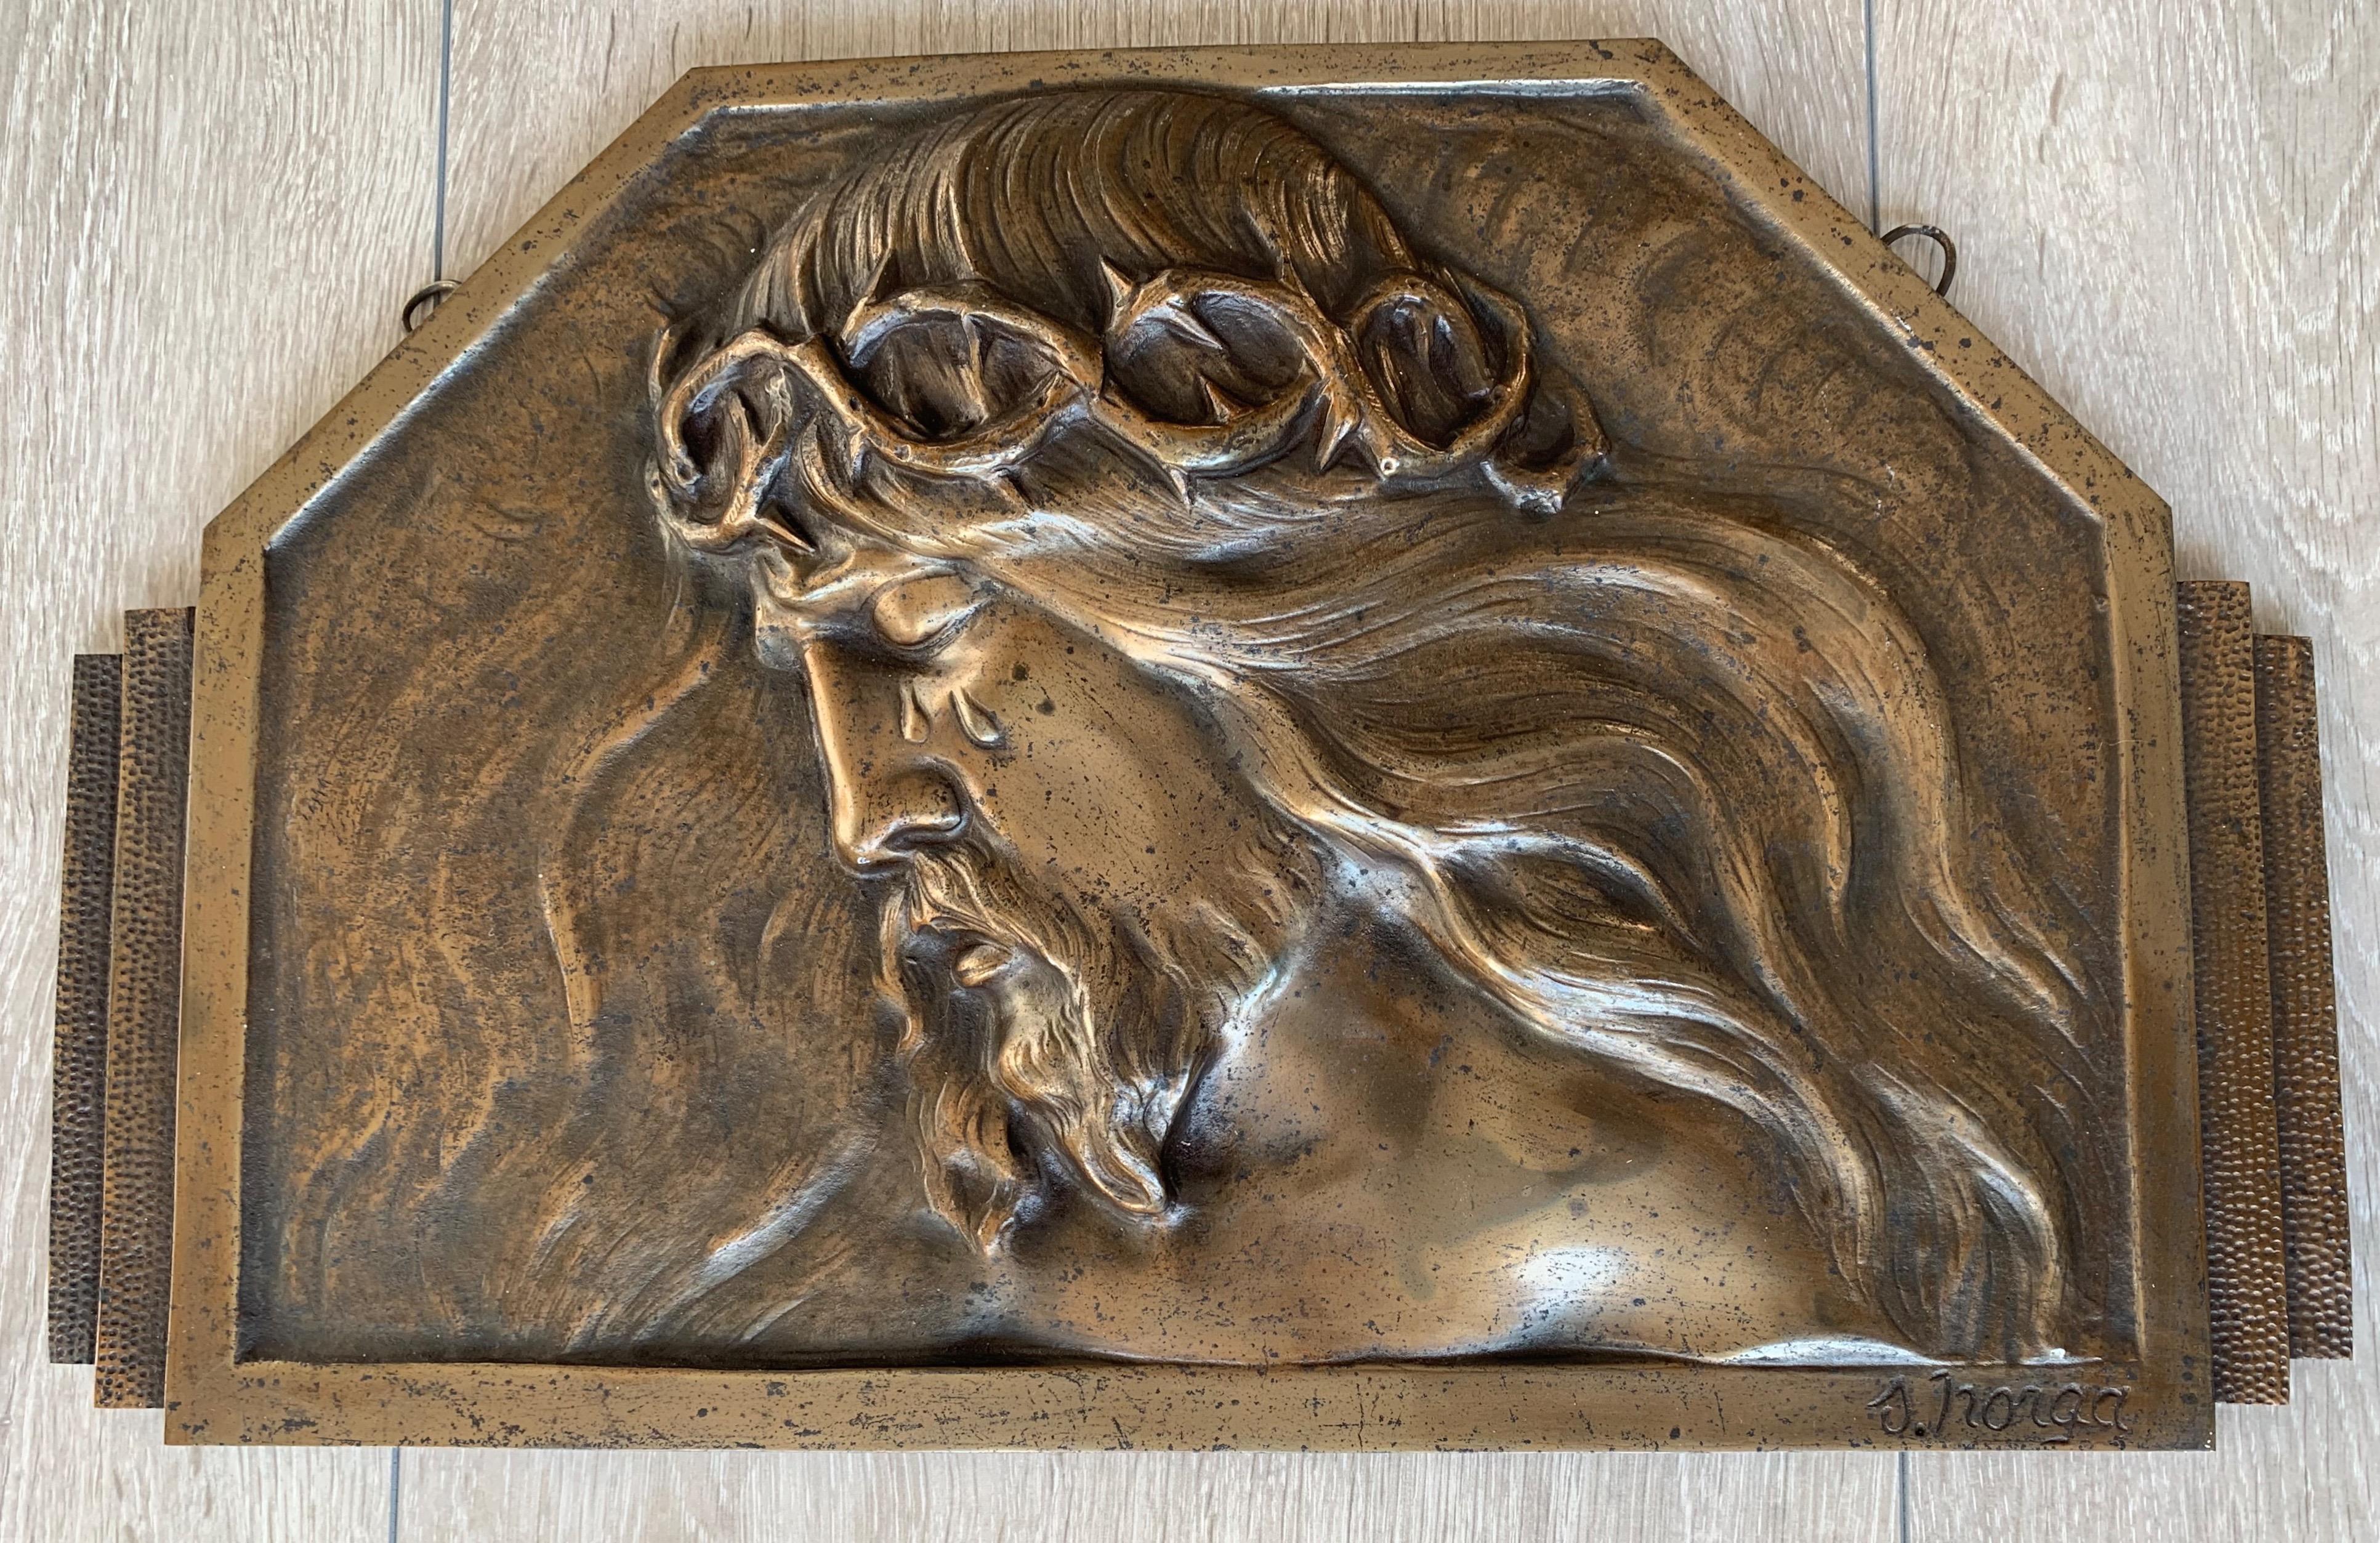 Impressive bronze plaque with a marvelous patina, by S. Norga. 

Most (young) people won't realize, but in order to spiritually and mentally grow in life, some hardship is actually needed. When you are suffering this is obviously not something